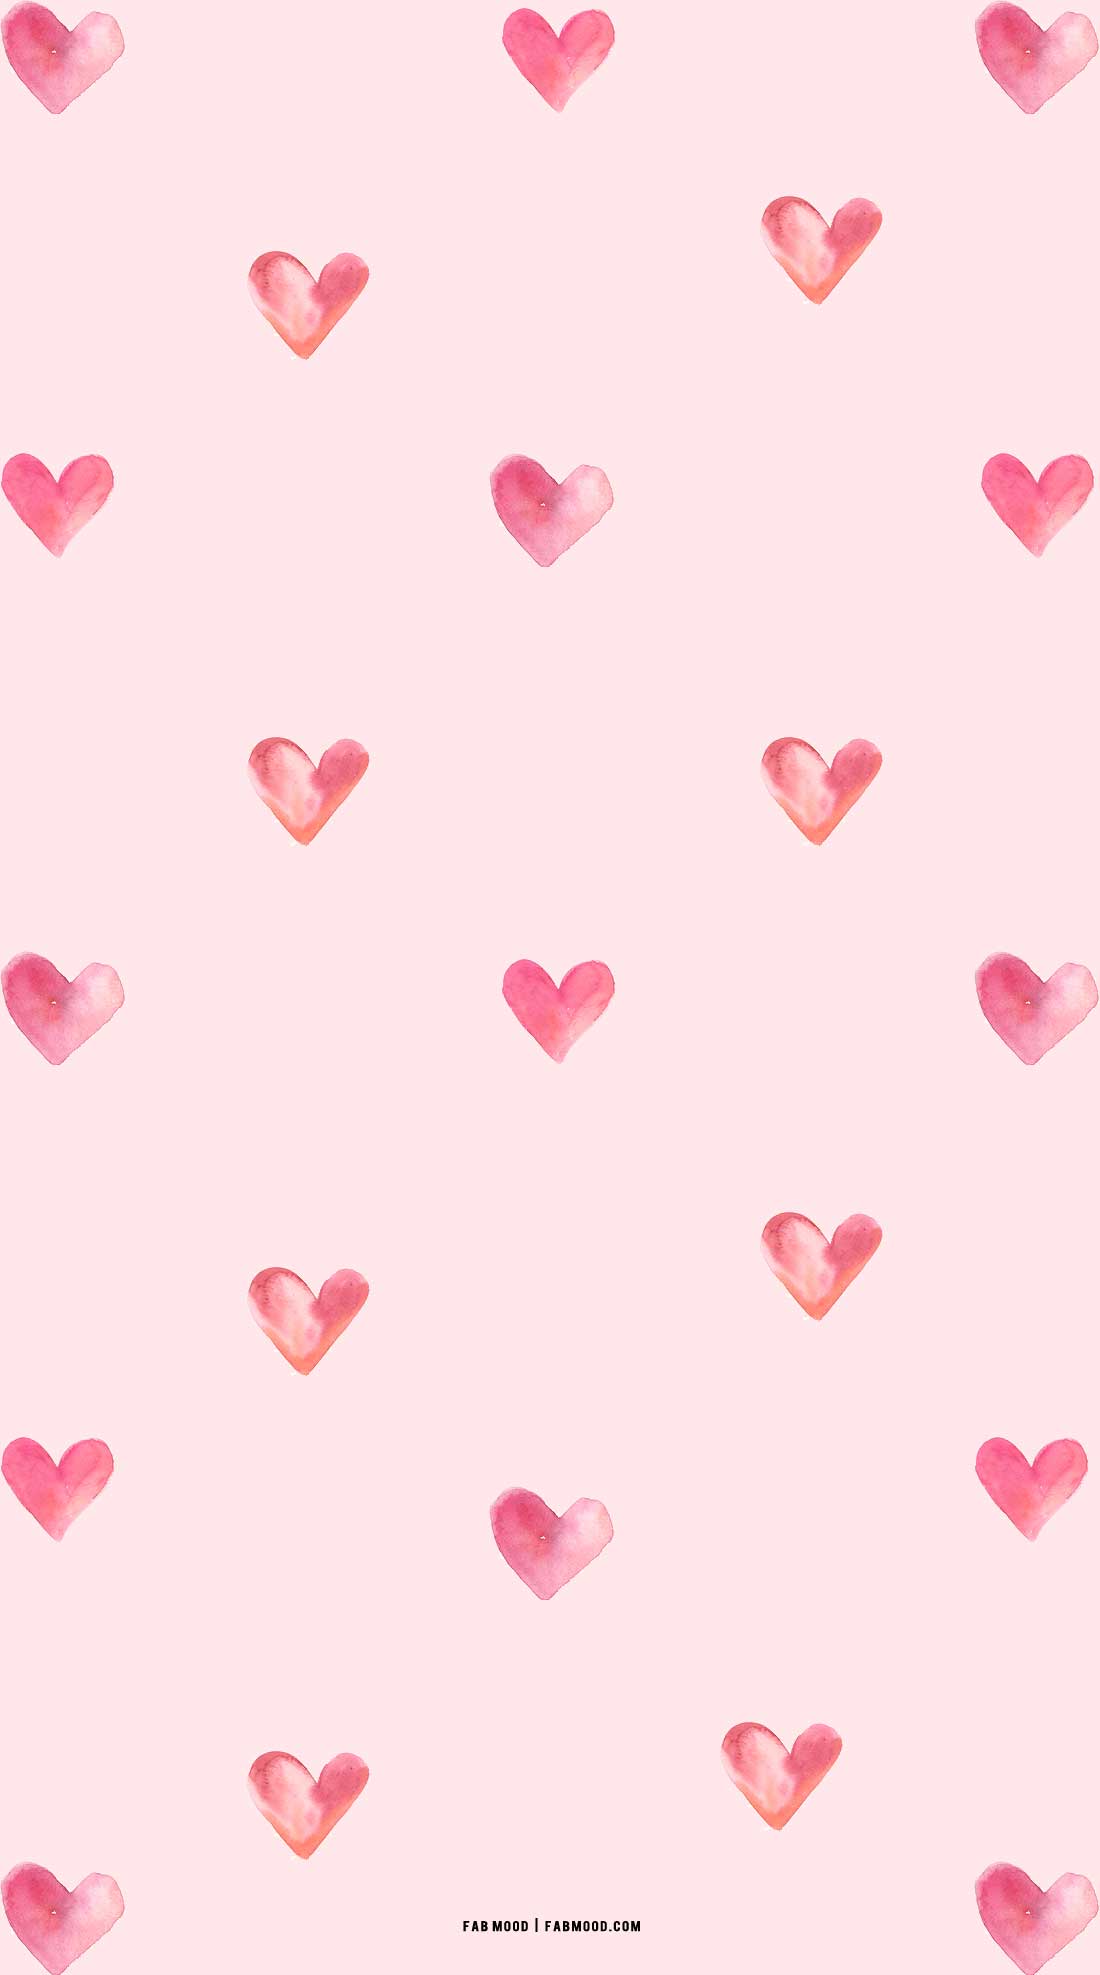 1080x1920  1080x1920 valentine day celebrations heart love hd  background for Iphone 6 7 8 wallpaper  Coolwallpapersme